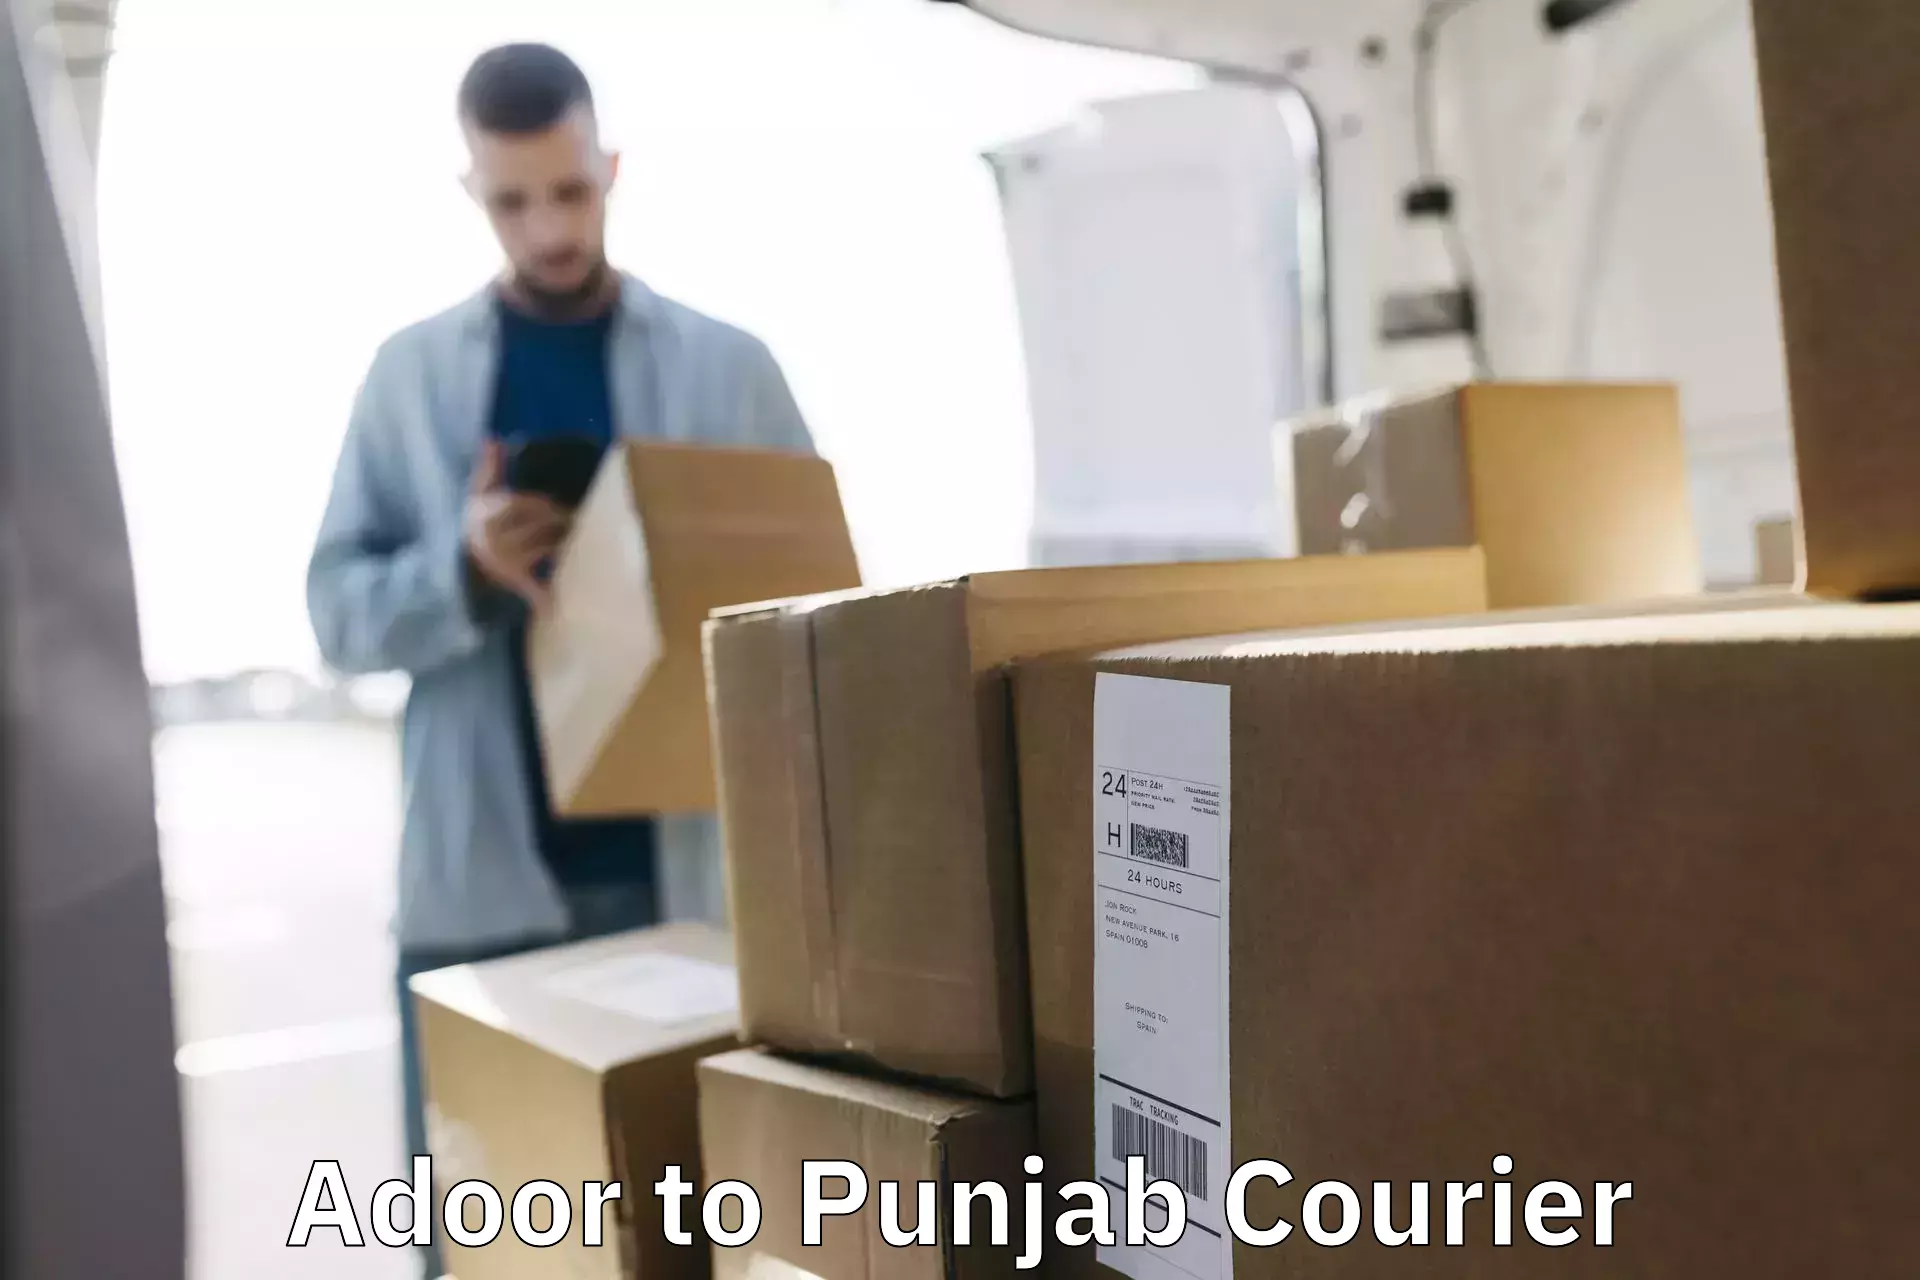 Personal parcel delivery Adoor to Amritsar